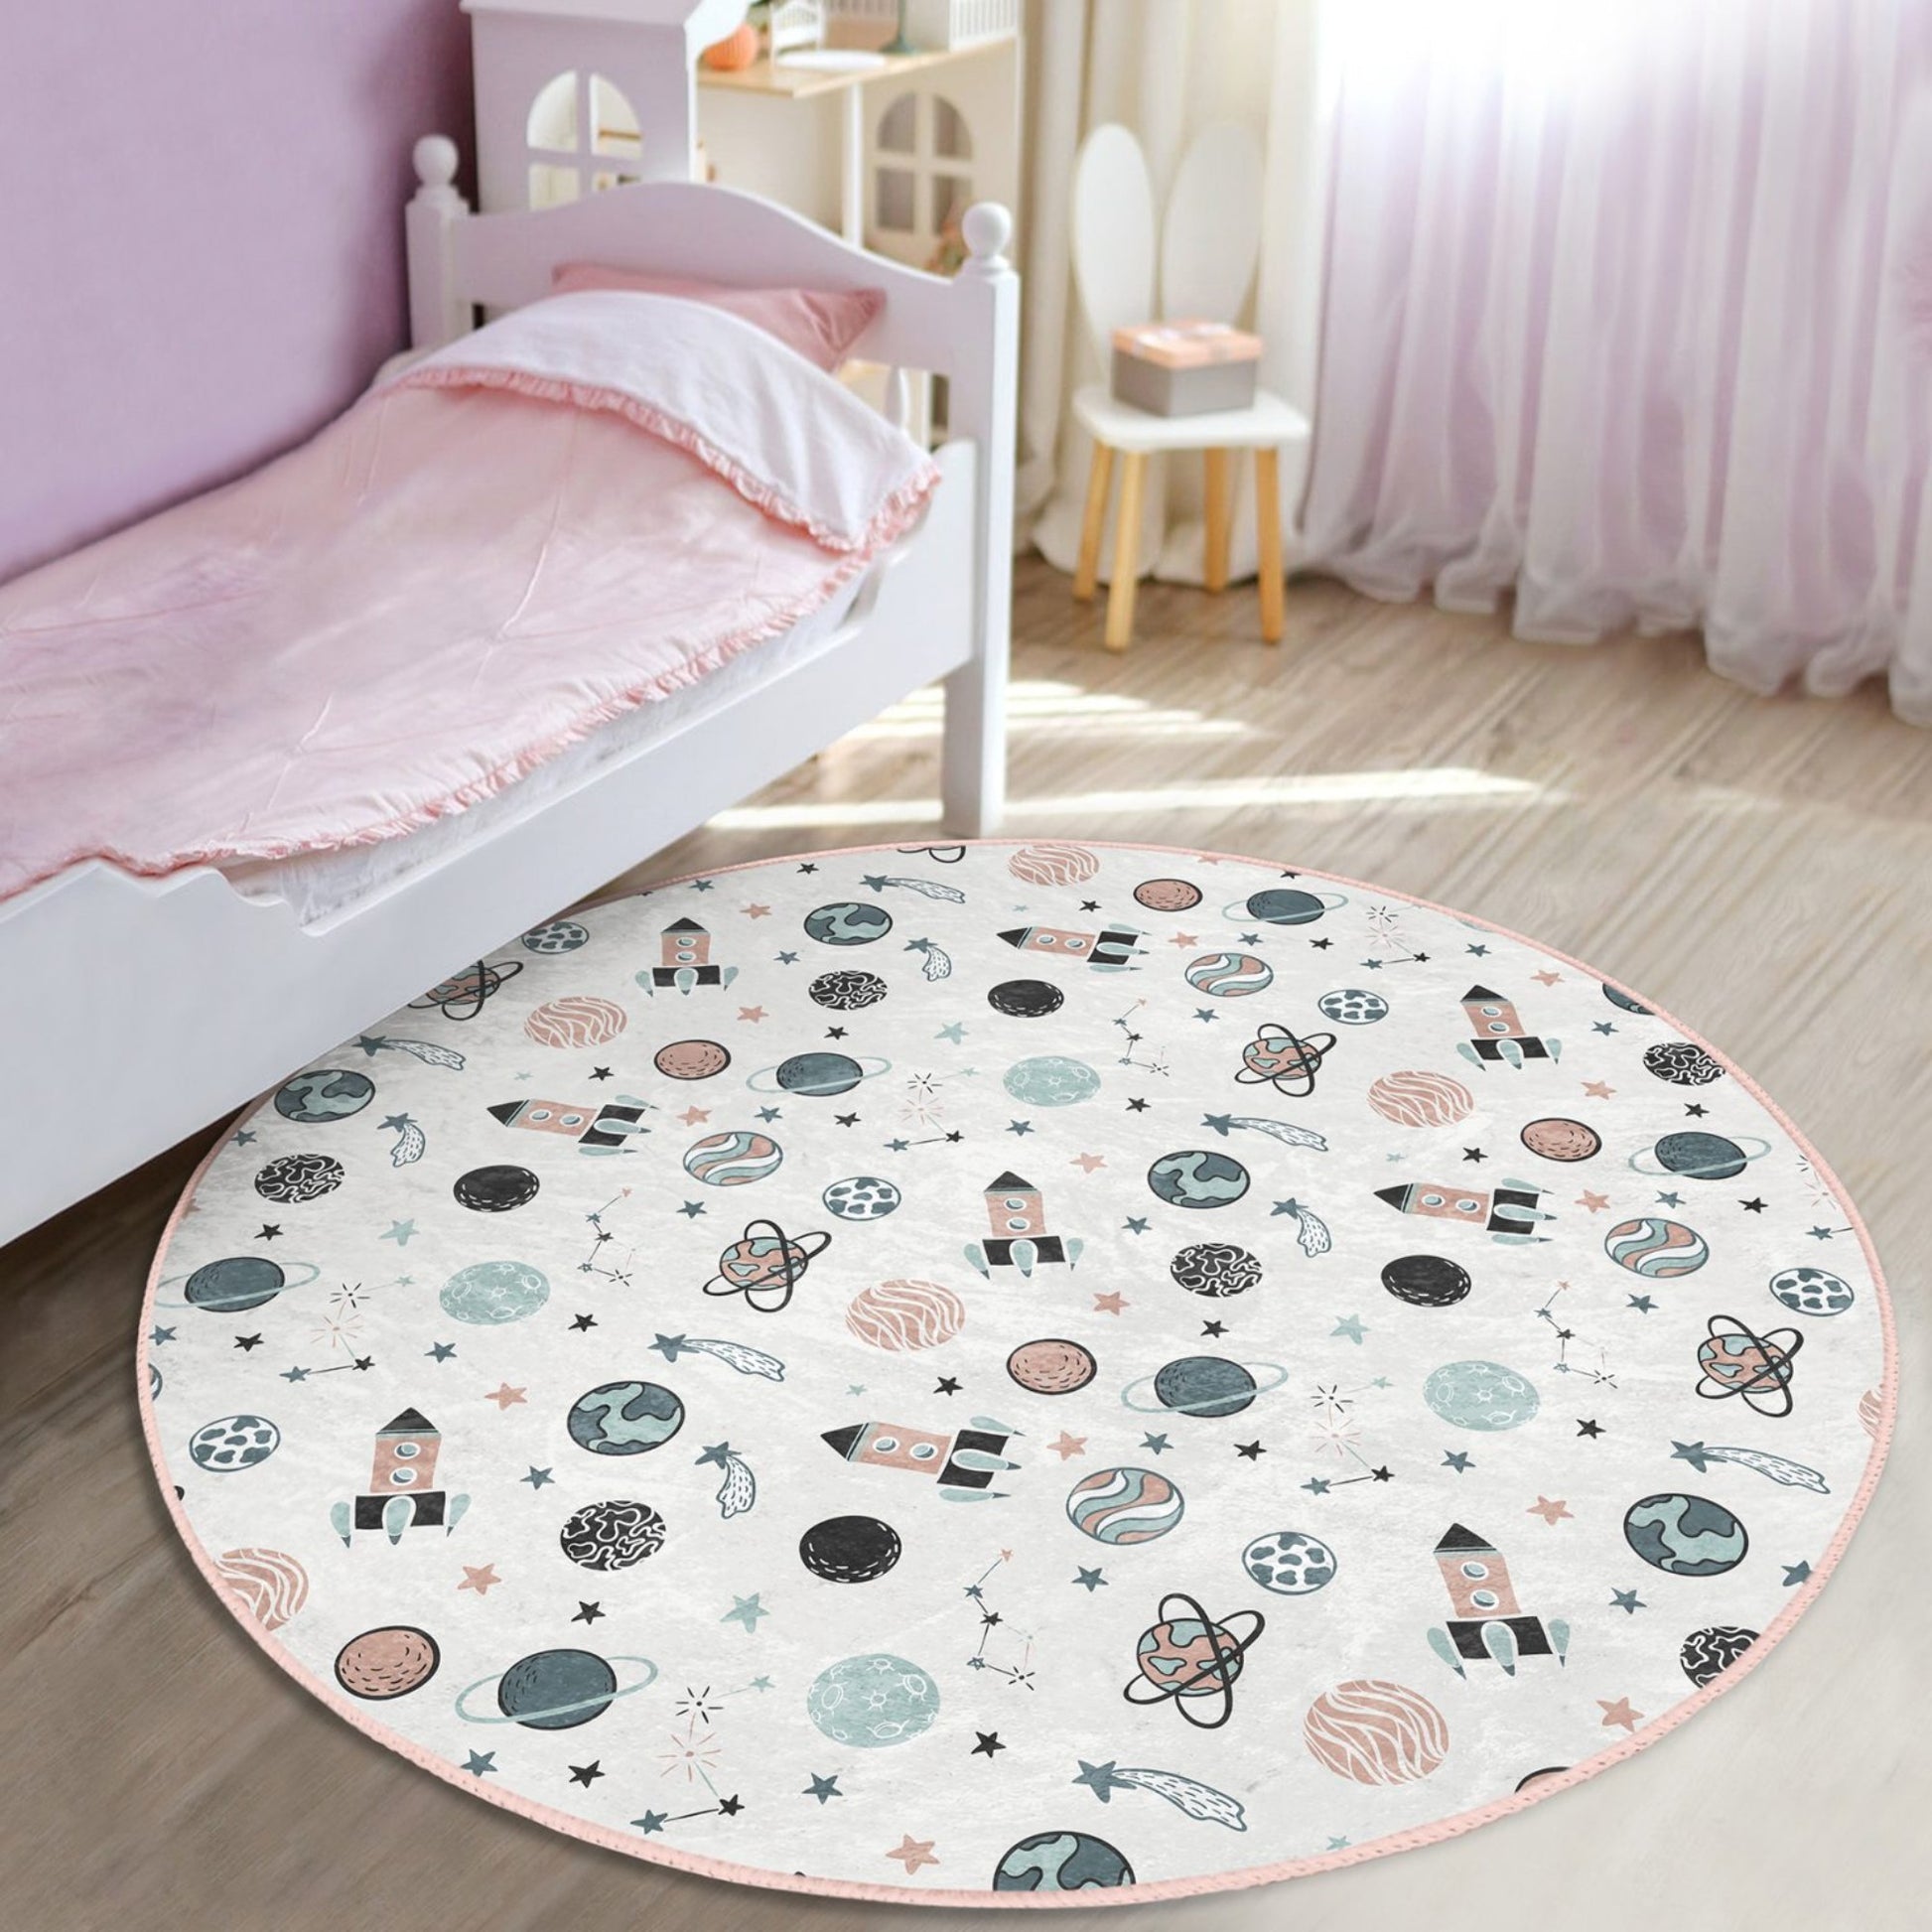 Durable Rug with Space Rocket and Planets Design